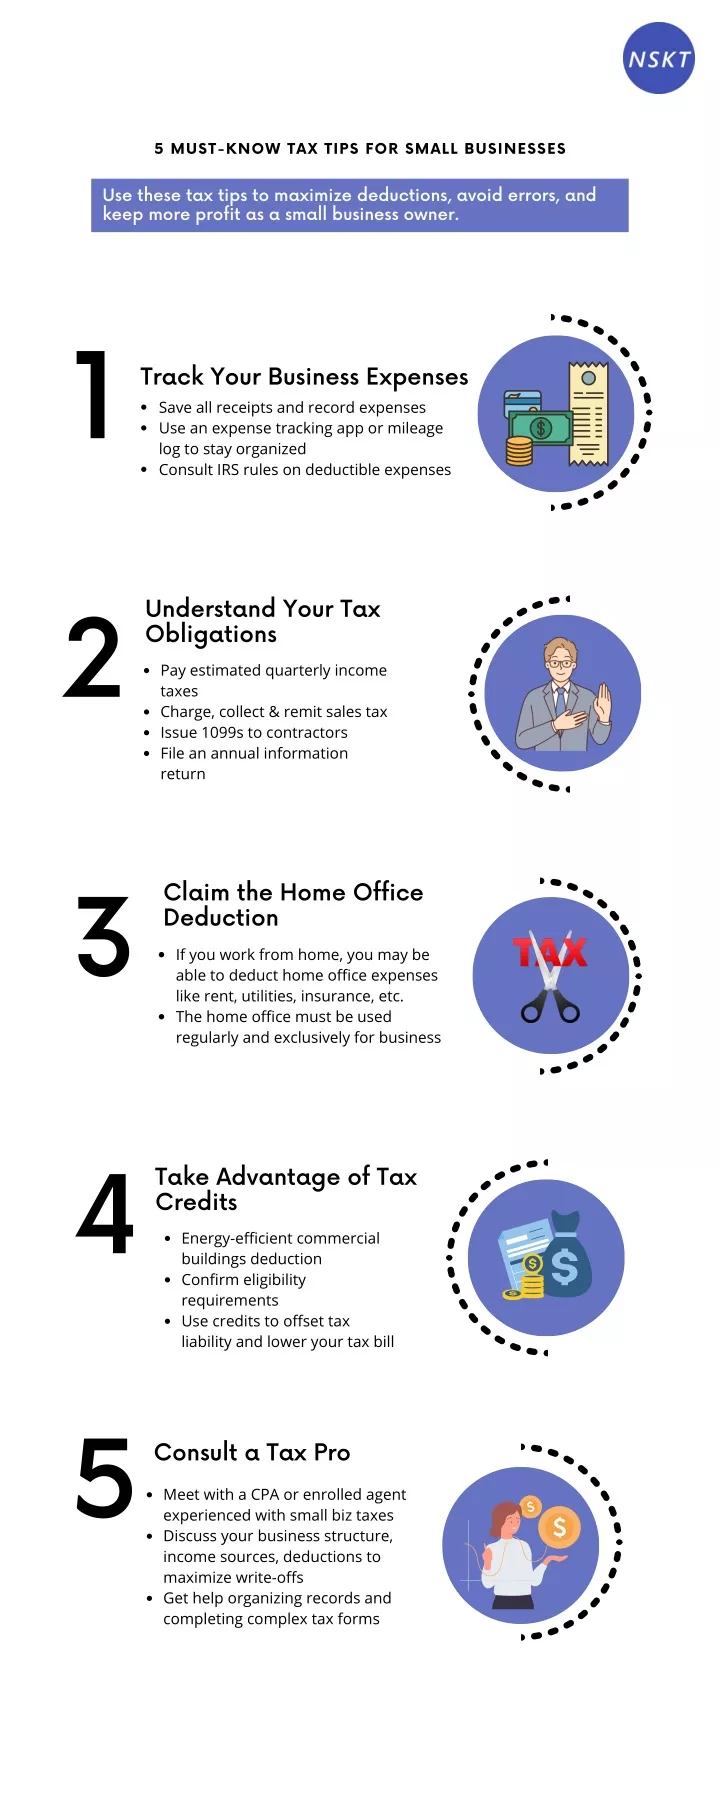 5 must know tax tips for small businesses